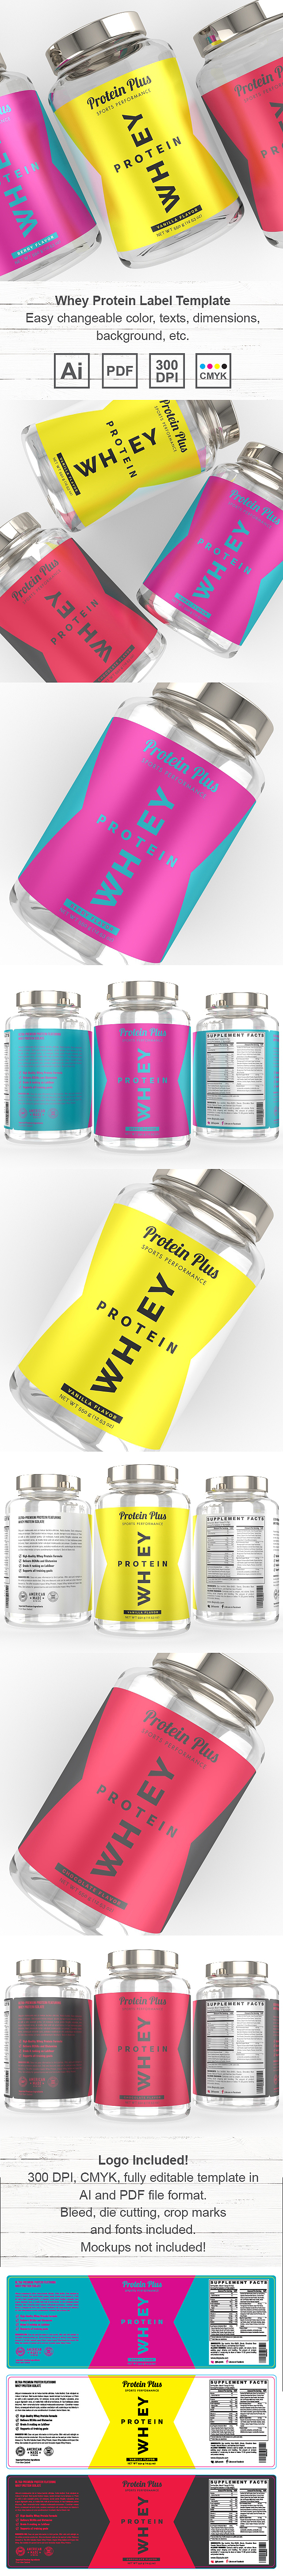 Whey Protein Powder Label Template